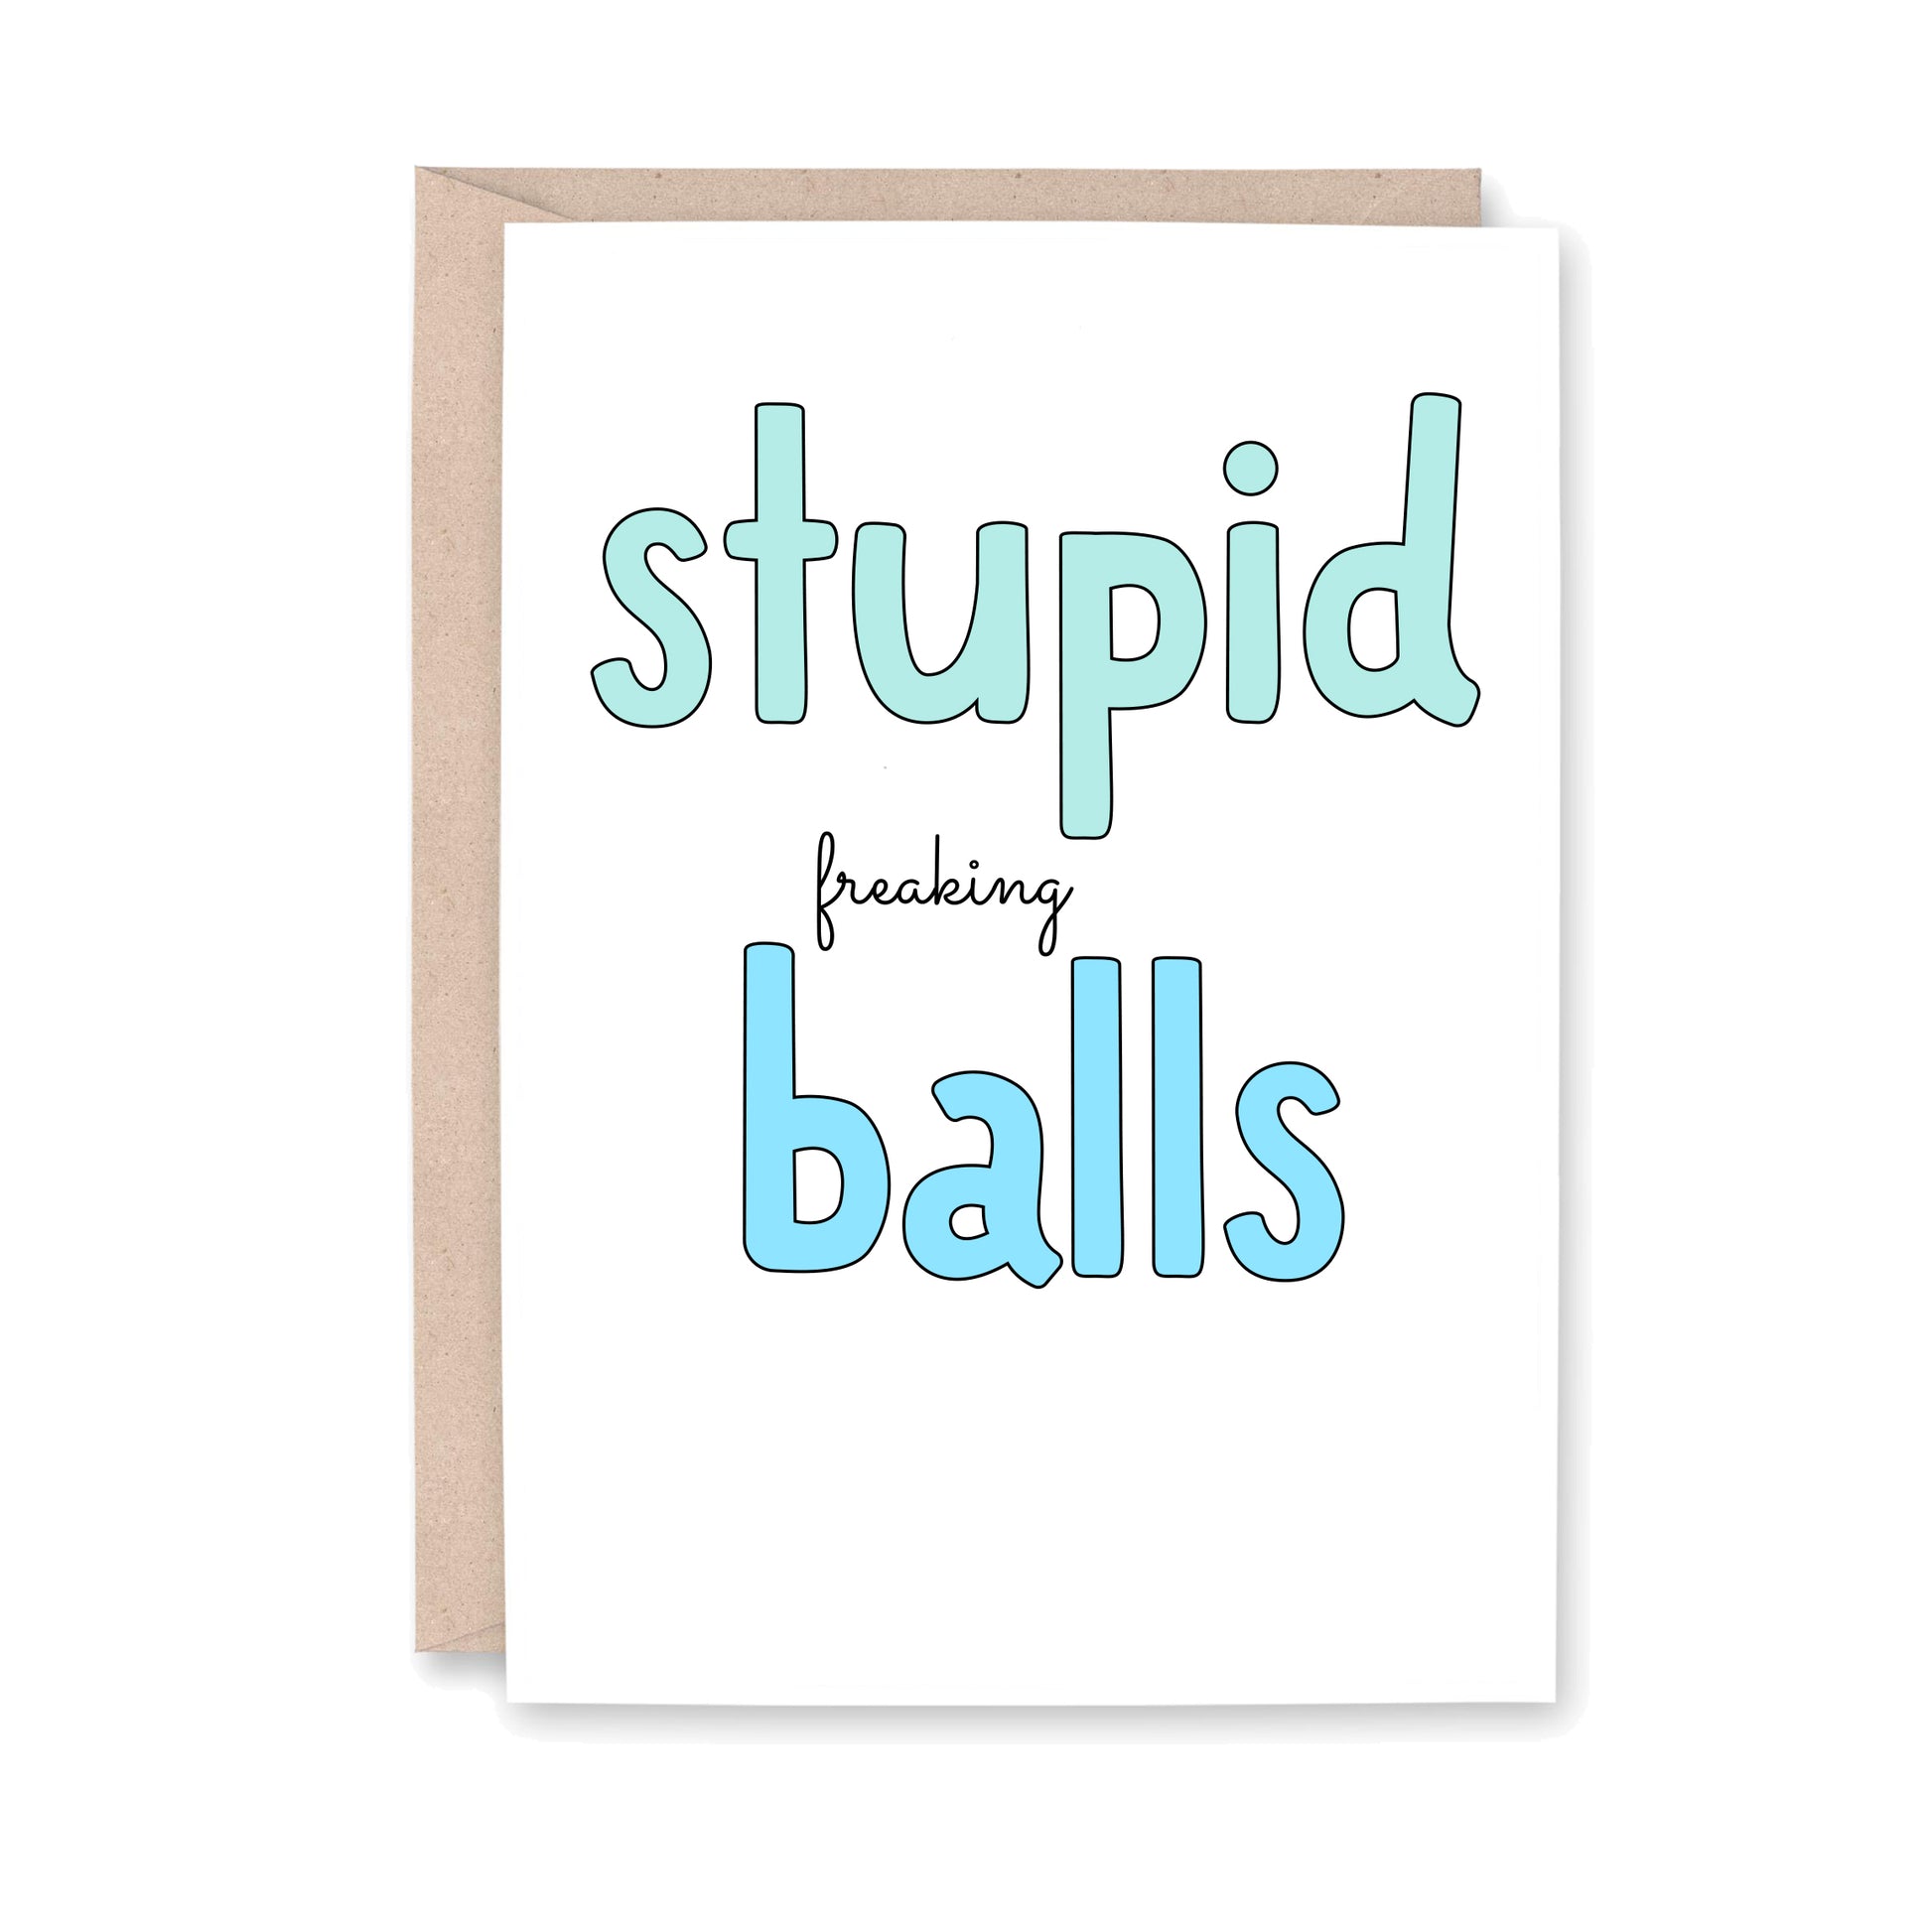 Greeting card with text that reads "stupid freaking balls"